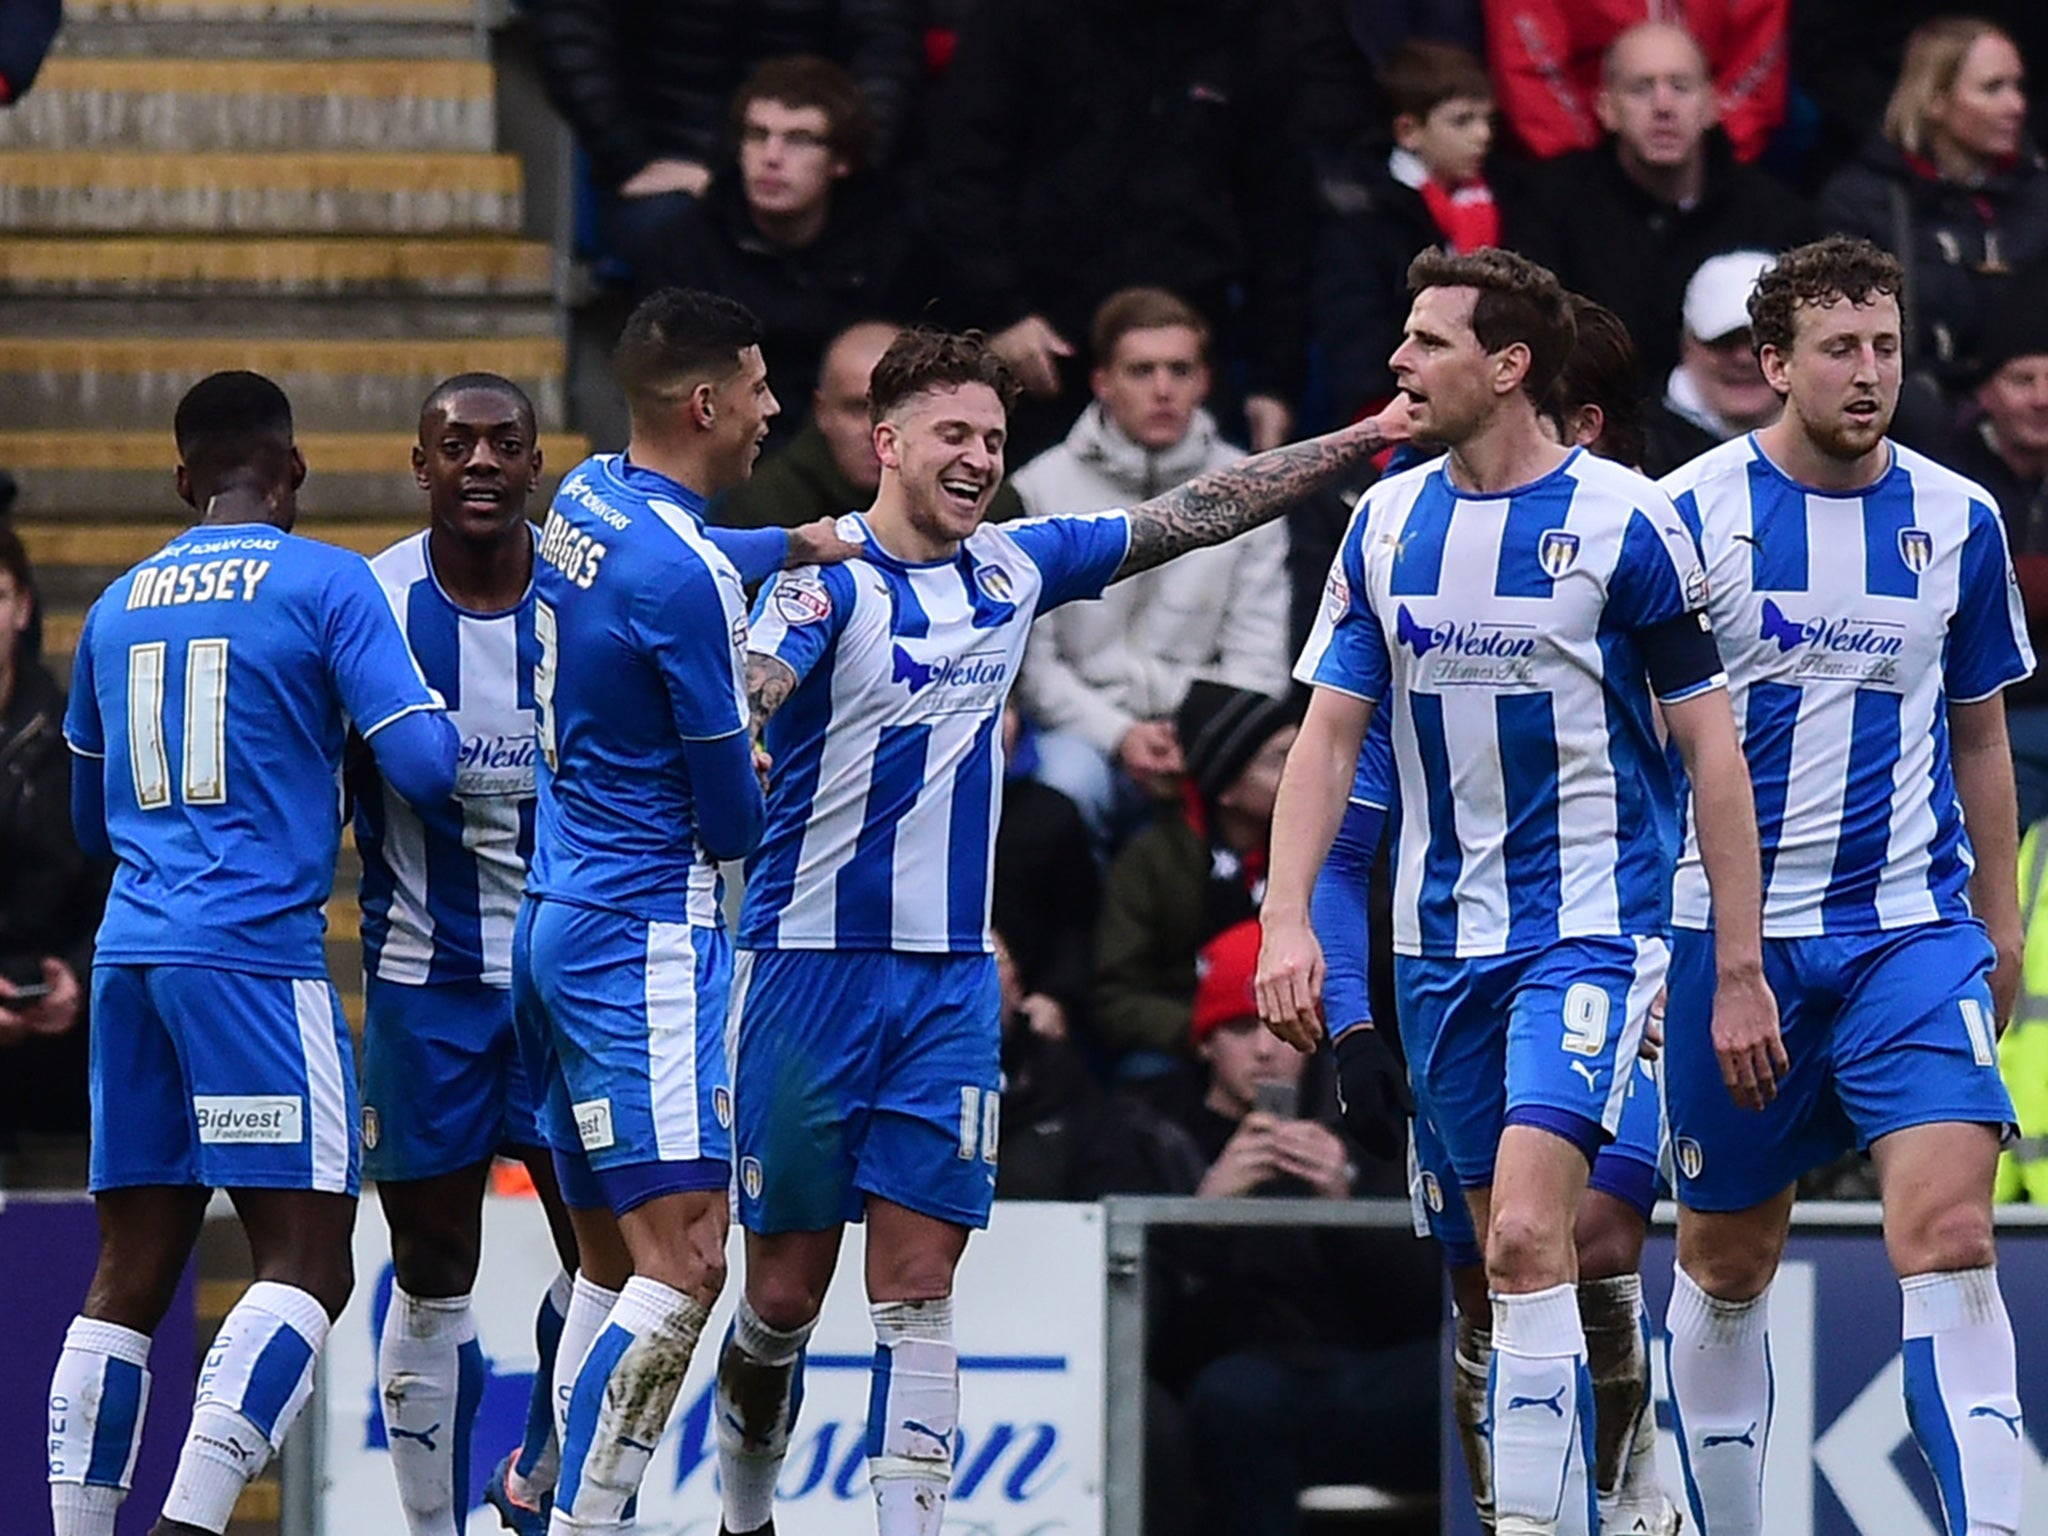 Colchester United's players celebrate going ahead against Charlton Athletic in the last round